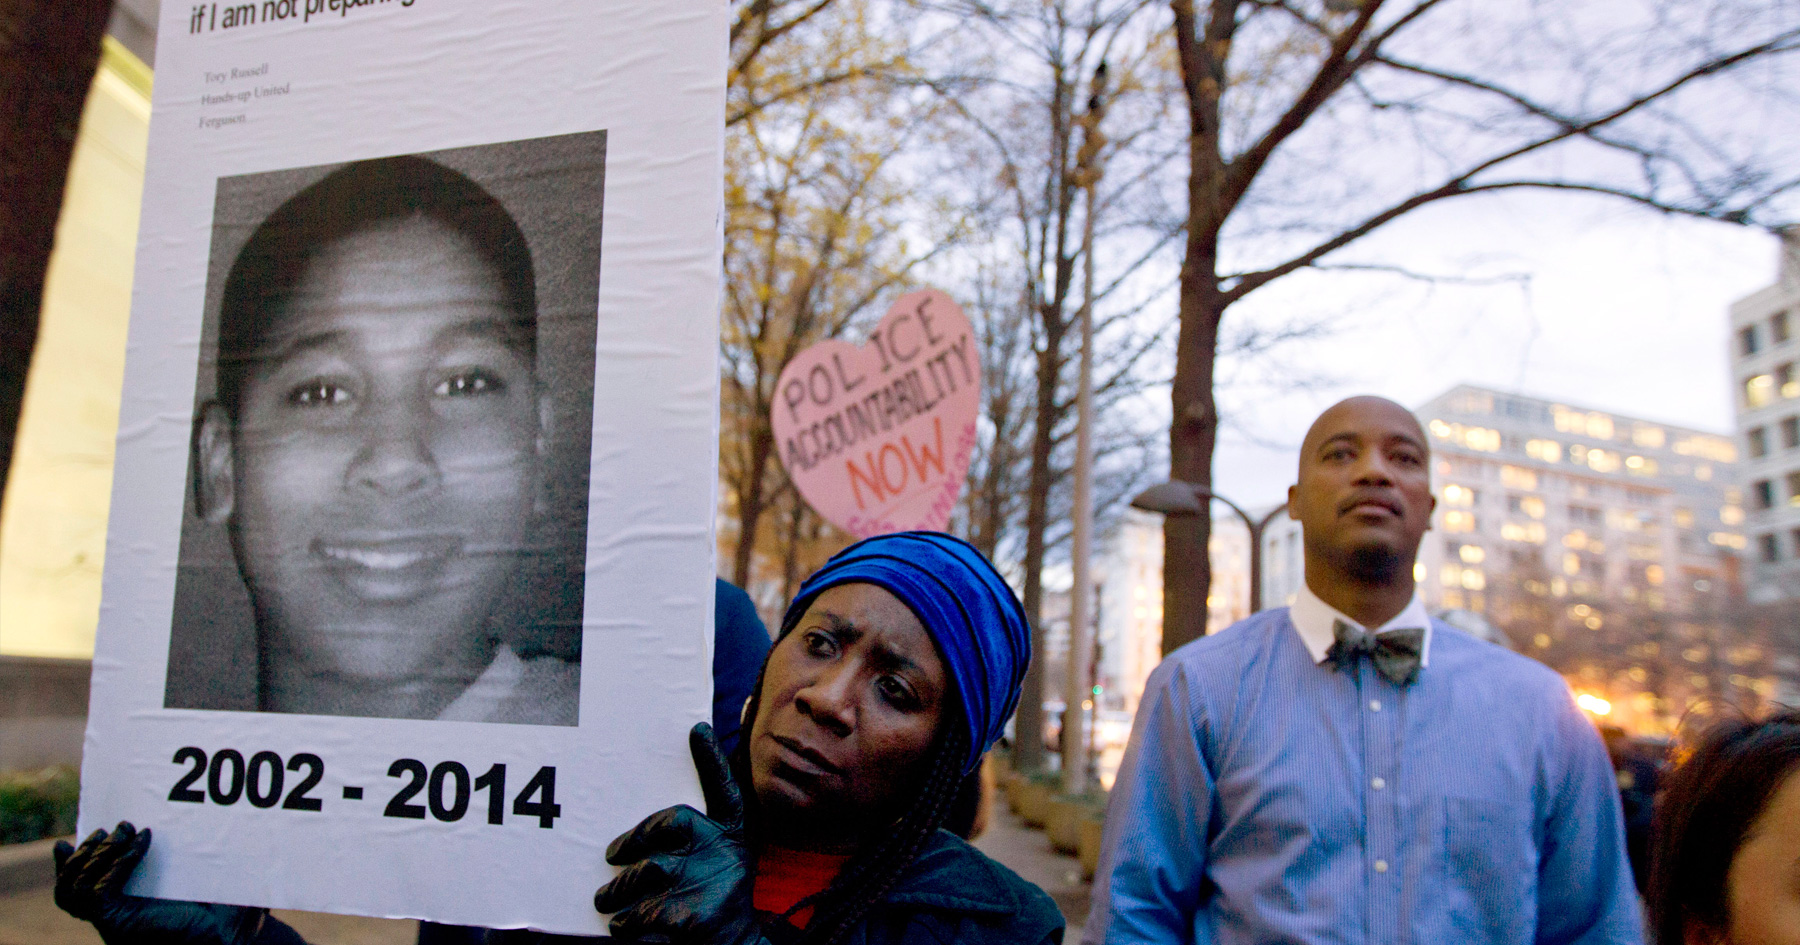 FILE - In a Monday, Dec. 1, 2014 file photo, Tomiko Shine holds up a picture of Tamir Rice, the 12 year old boy fatally shot on Nov. 22 by a rookie police officer, in Cleveland, Ohio, during a protest.